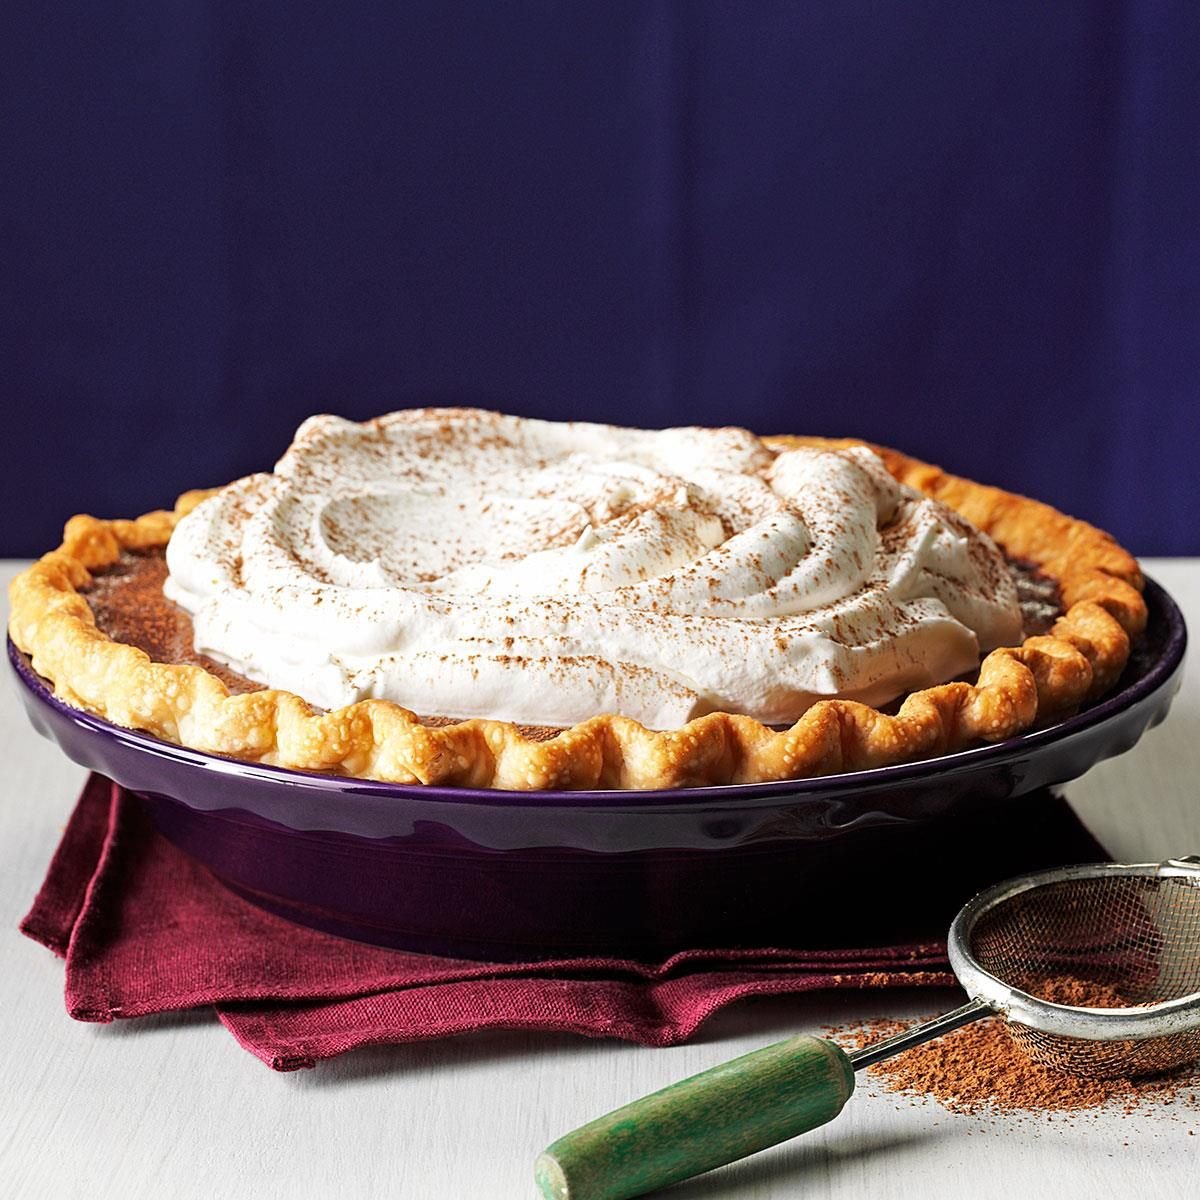 Pretty Pies, Baking Tools and Cookbooks (+ Video) - The Inspired